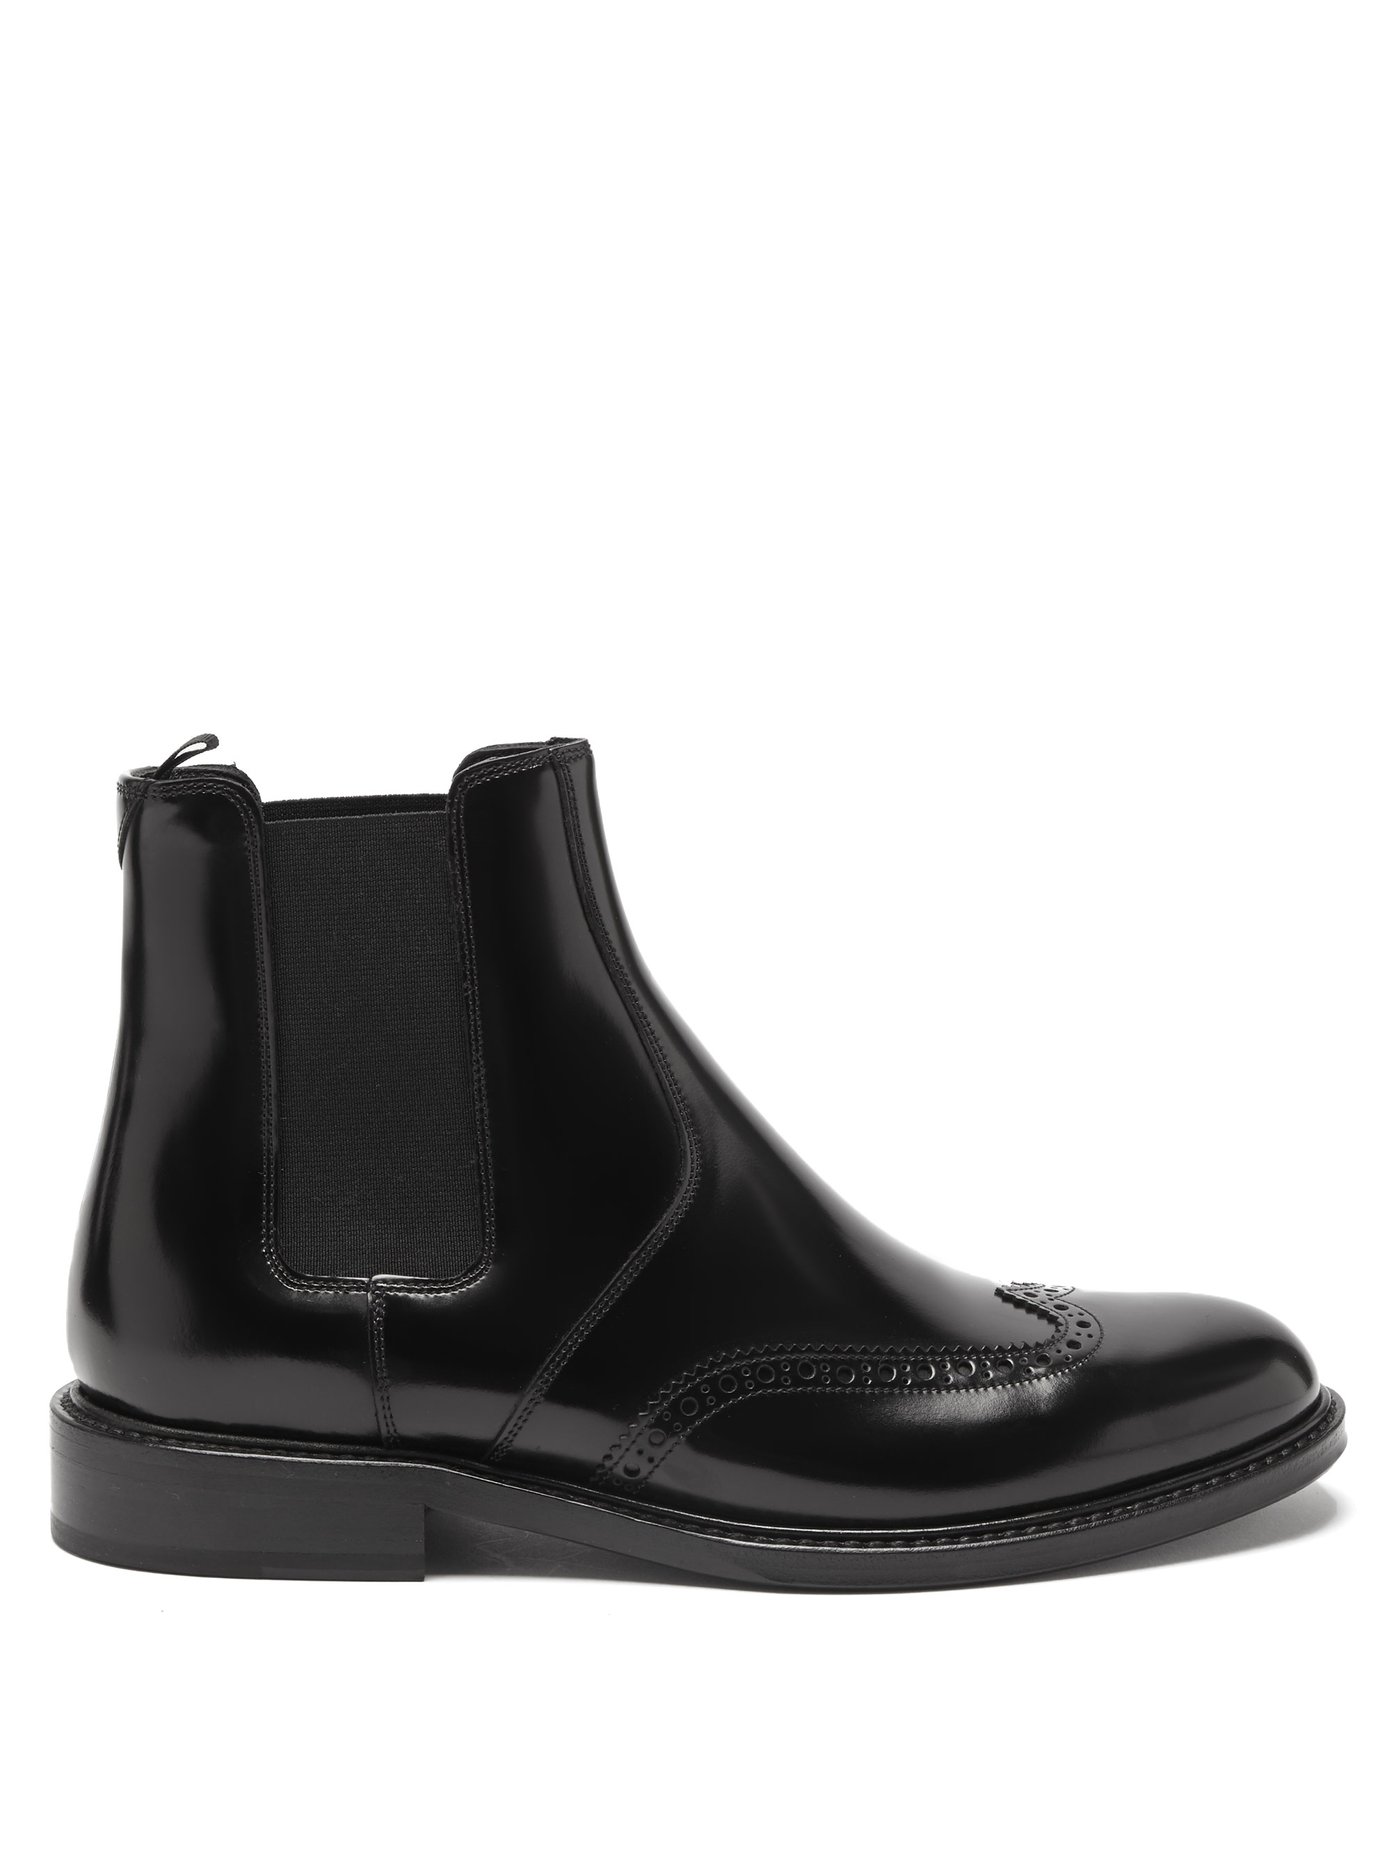 ysl chelsea boots womens